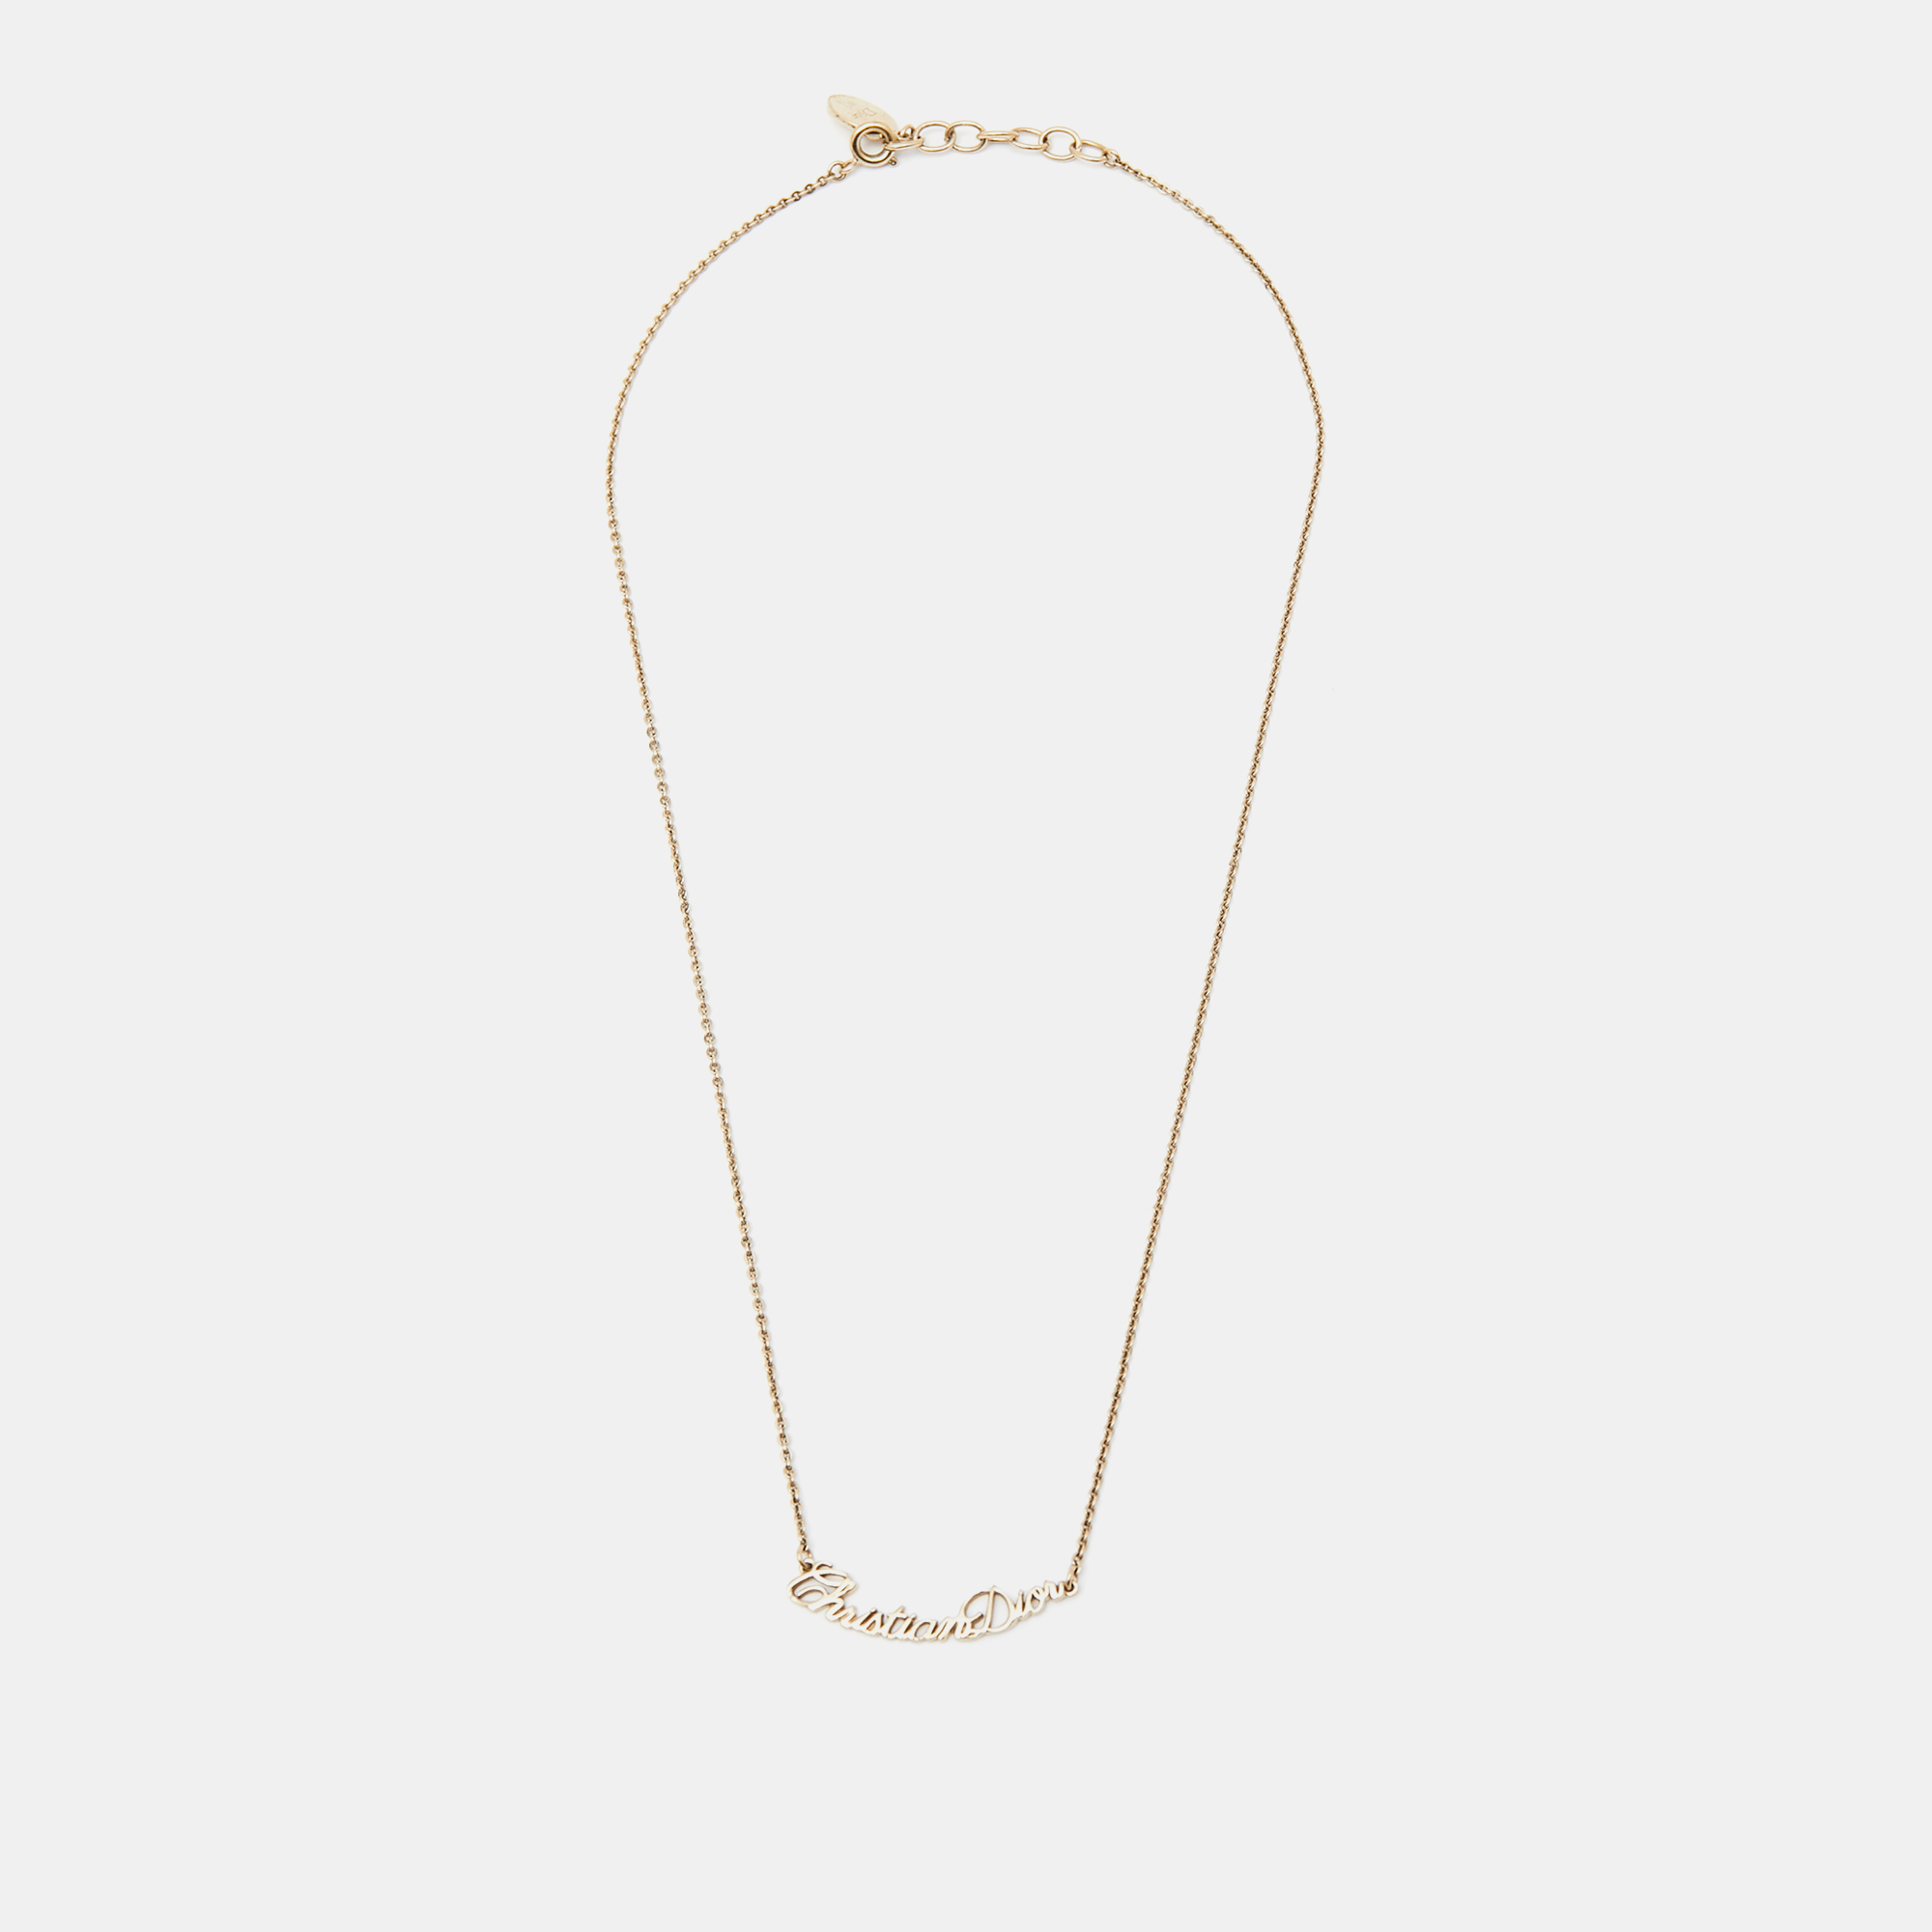 

Dior Atelier Gold Tone Metal Chain Necklace